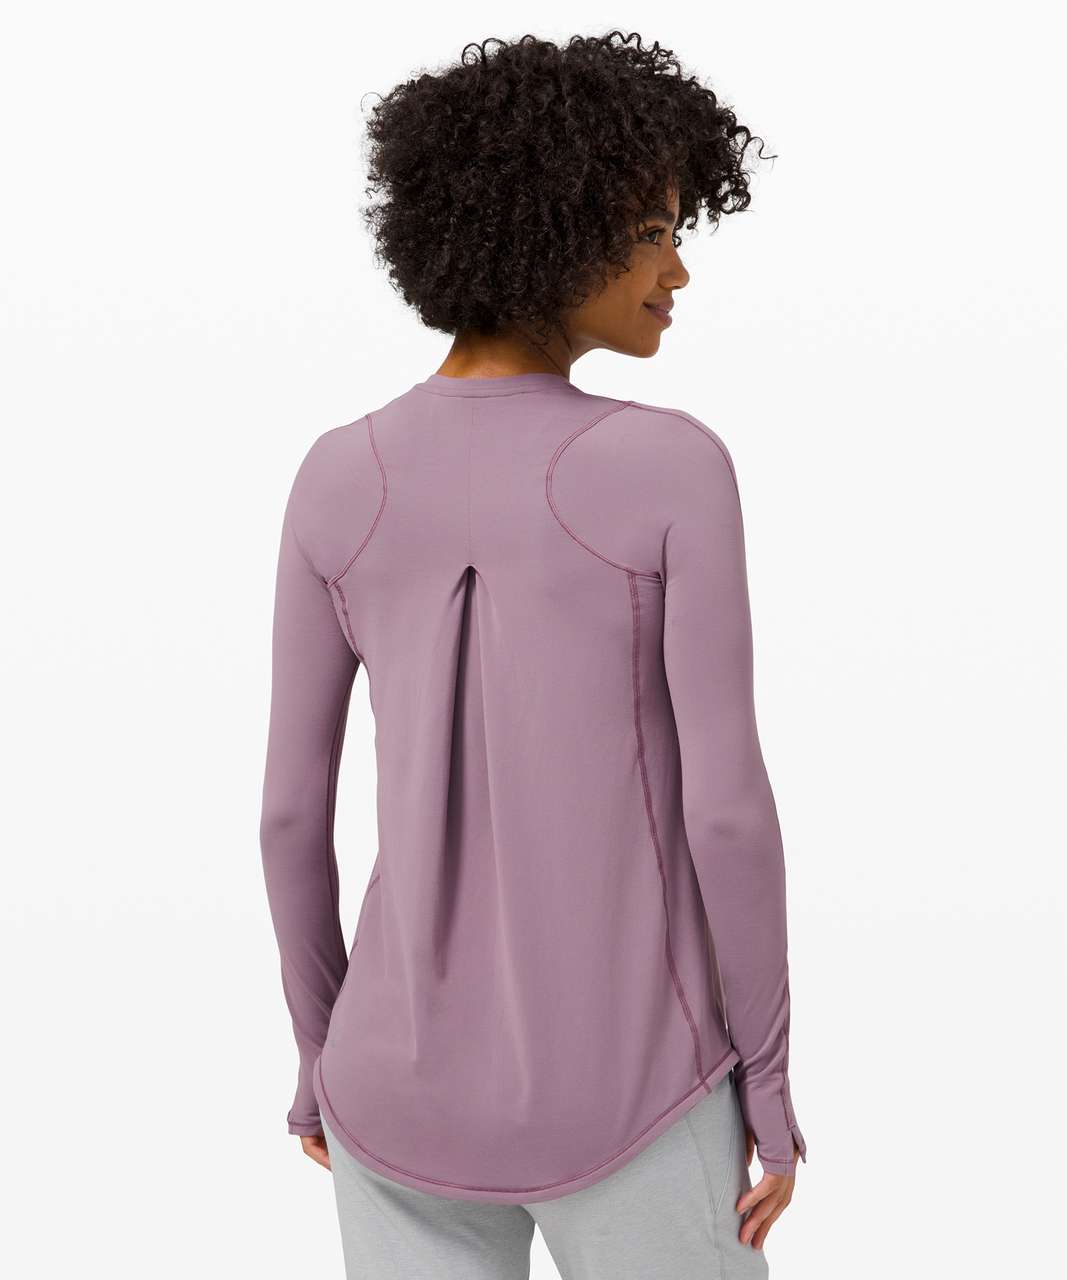 Lululemon Tuck & Flow Long Sleeve - Frosted Mulberry